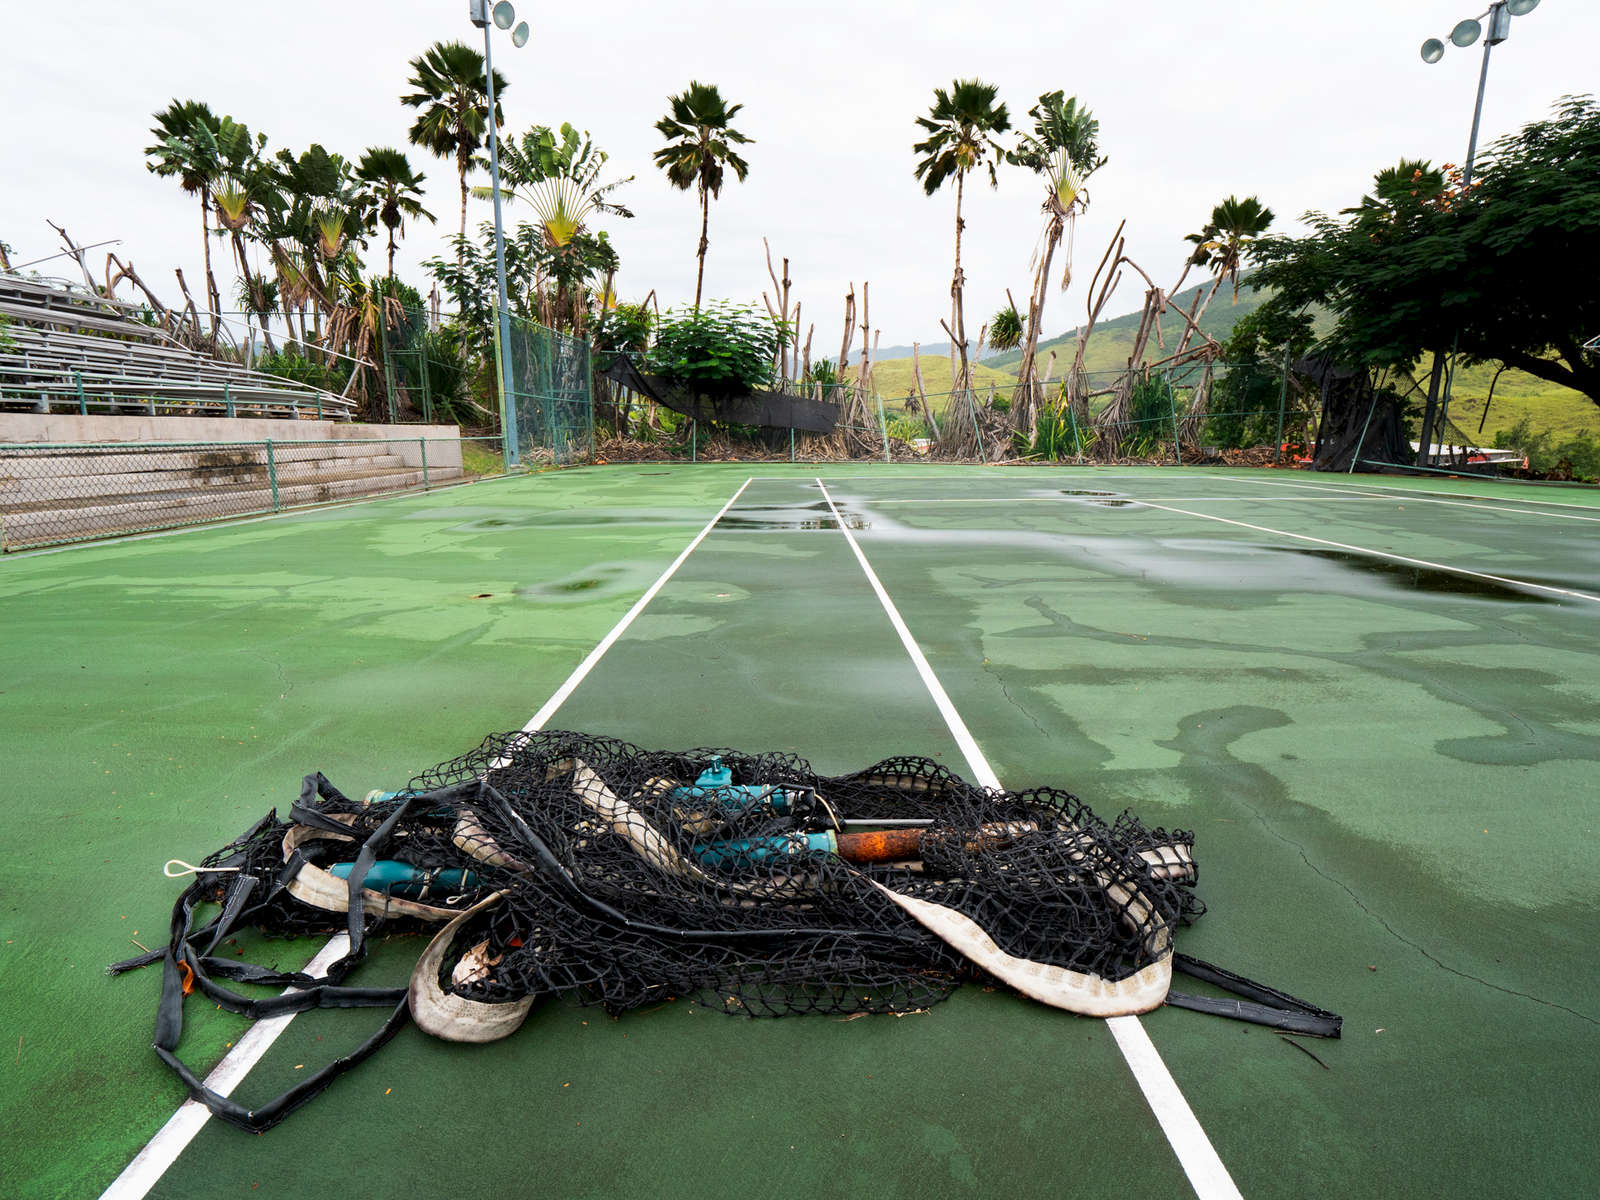 SALINAS, PUERTO RICO - NOVEMBER 14:  The Tennis court is shown at the Albergue Olympic Training Center of  Puerto Rico on November 14, 2018 in Salinas, Puerto Rico.  The Tennis courts were all damaged by Hurricane Maria and they are slowly being rebuilt.  The effort continues in Puerto Rico to remain and rebuild more than one year after the Hurricane Maria hit and devastated the island on September 20, 2017. The official number of deaths from the disaster is 2,975. 